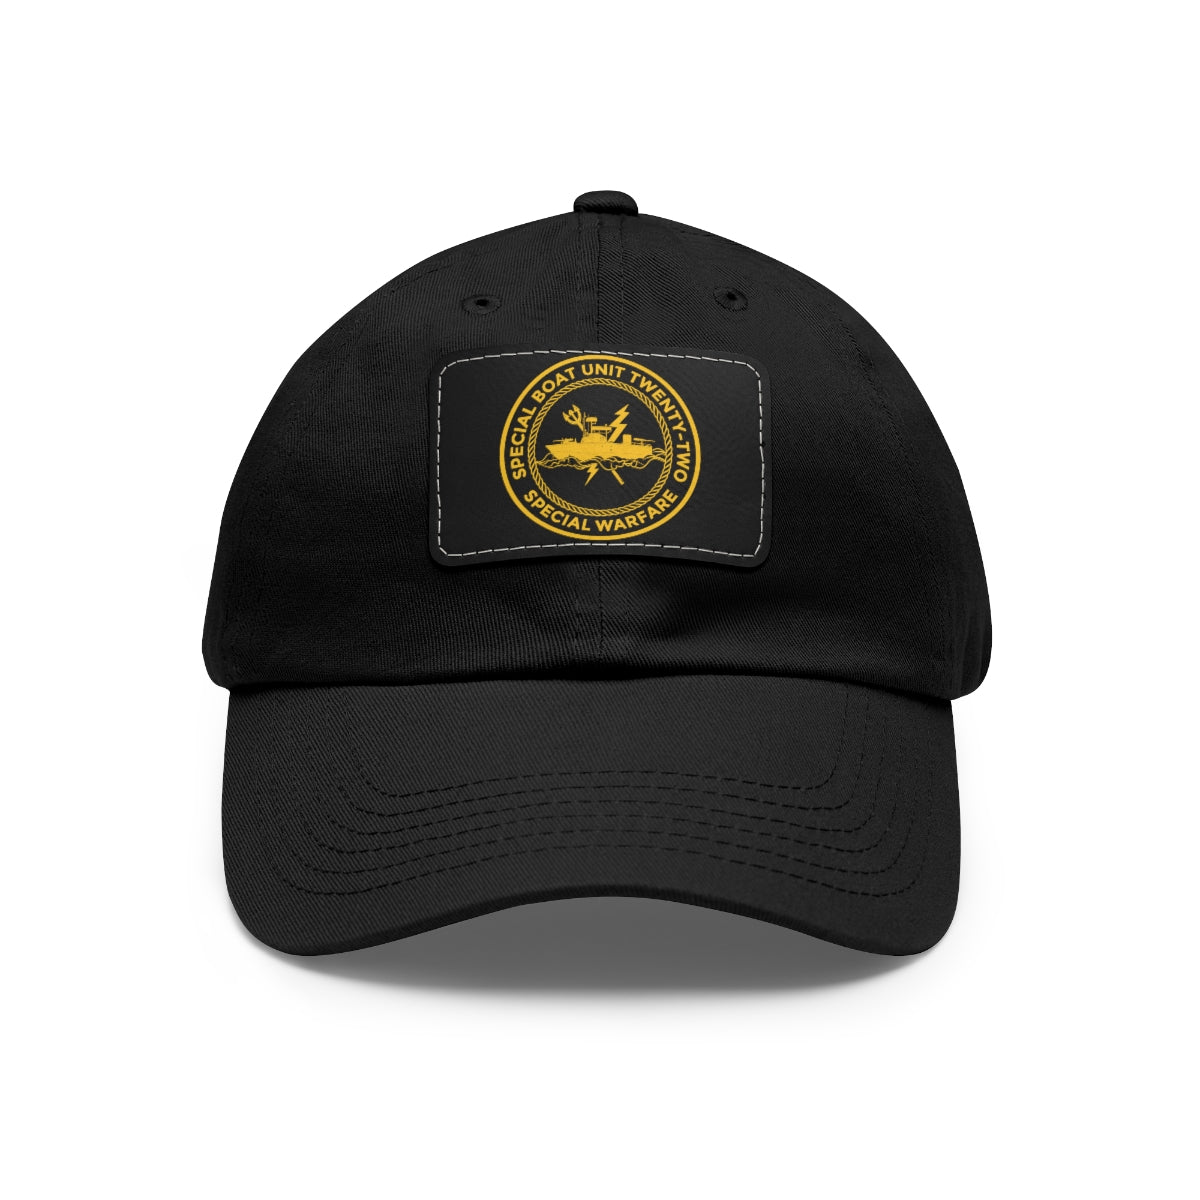 SBU 22 v2 Hat with Leather Patch (Gold)